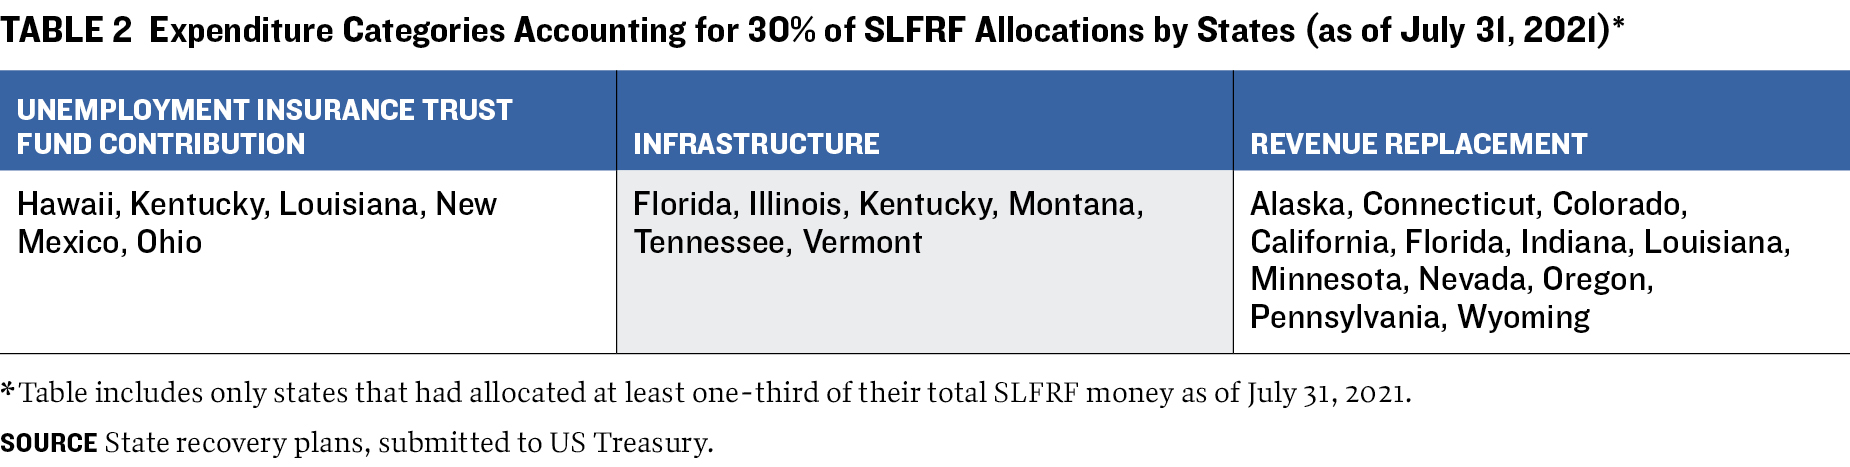 Expenditure Categories Accounting for 30% of SLFRF Allocations by States (as of July 31, 2021)*